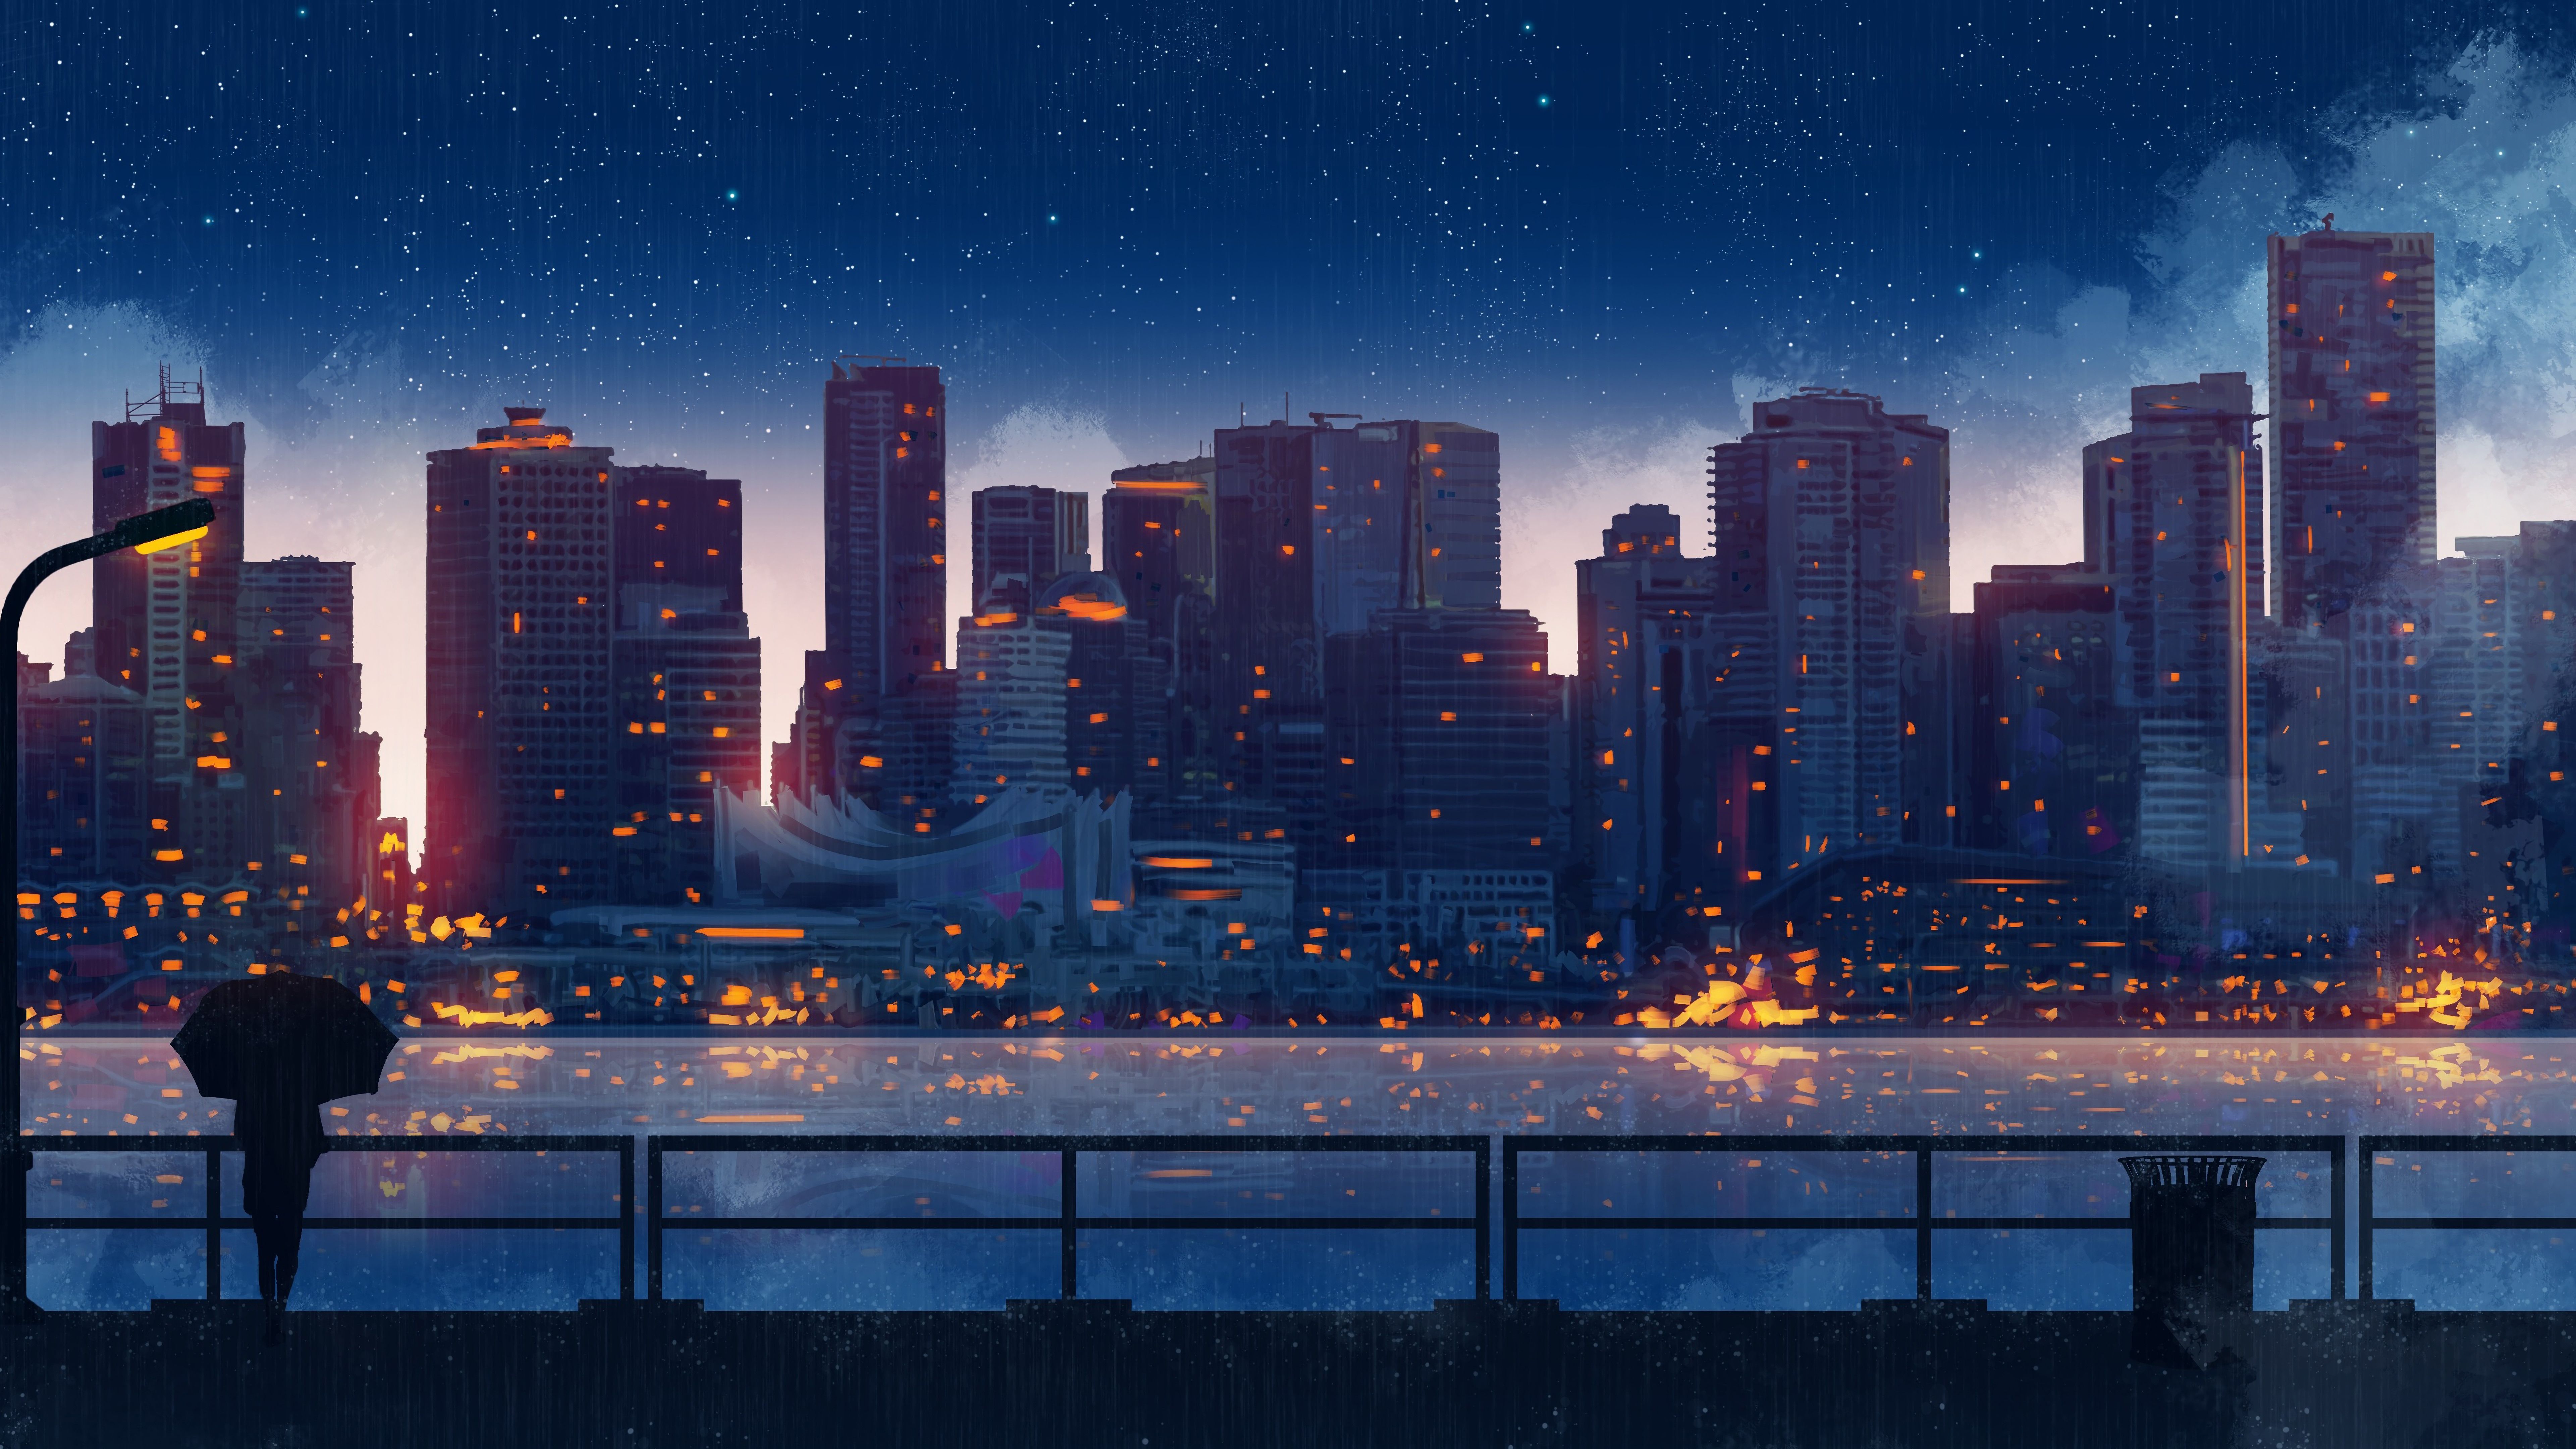 A city skyline with people on the pier - Anime landscape